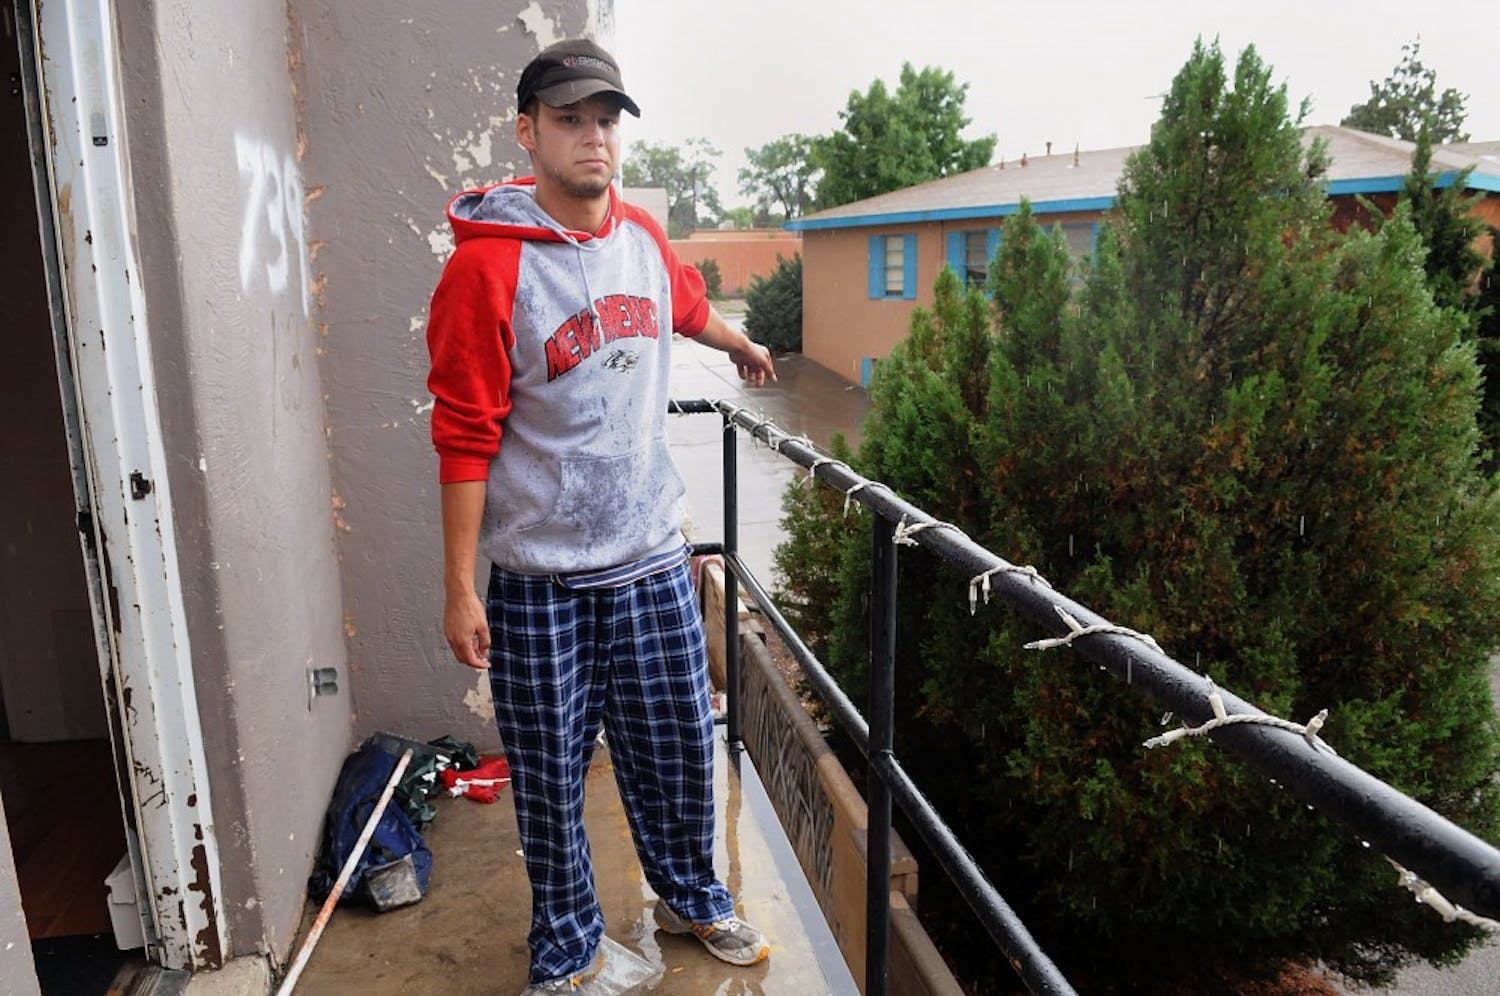 	UNM business student Alexander Heubeck points to the balcony he jumped off of to avoid a fire in the Telos House on Thursday. One room in the house caught fire at about 2:50 a.m. No one was injured. The Telos houses have caught fire four times in the past 14 months.